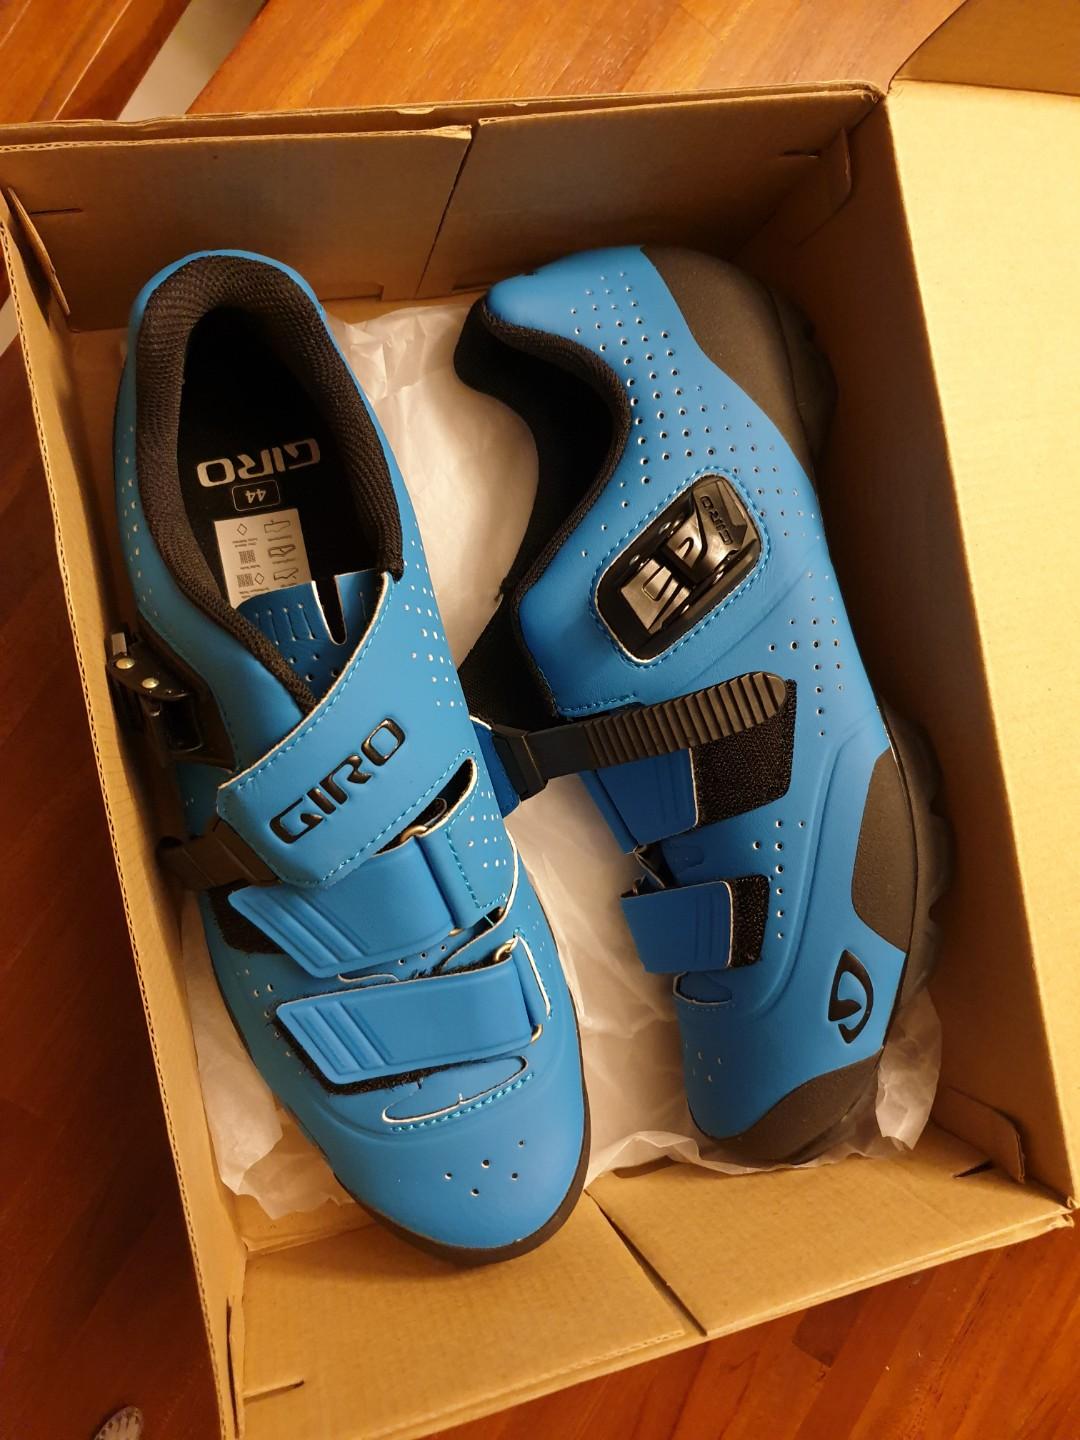 Giro Privateer R MTB shoes size euro 